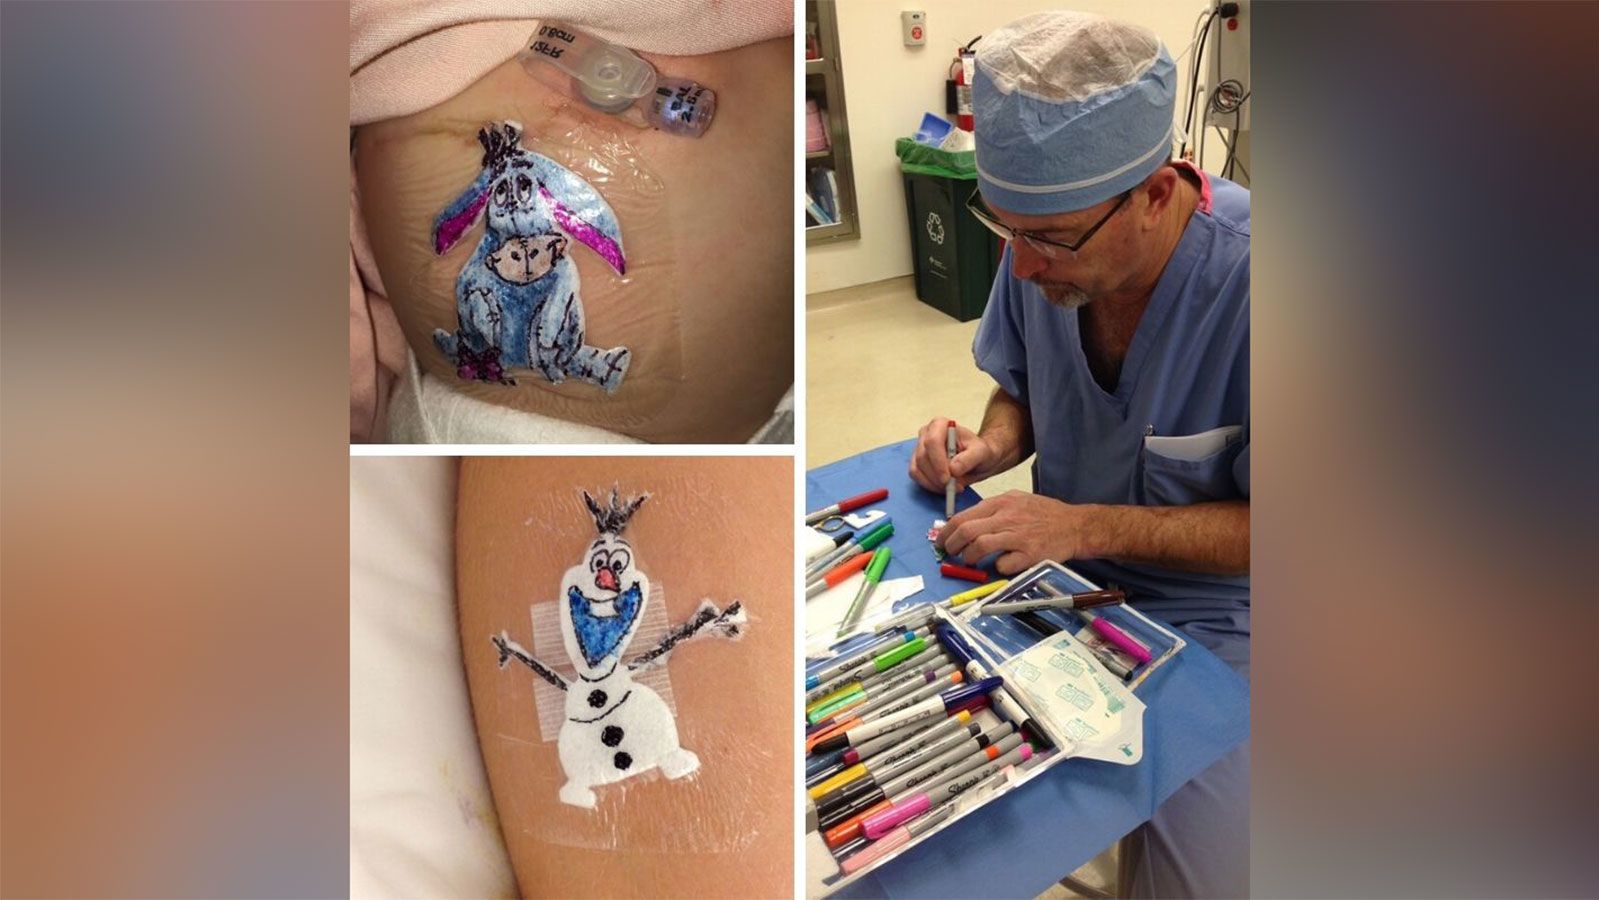 Dr. Robert Parry's illustrations have found renewed interest this year at Akron Children's Hospital in Ohio.